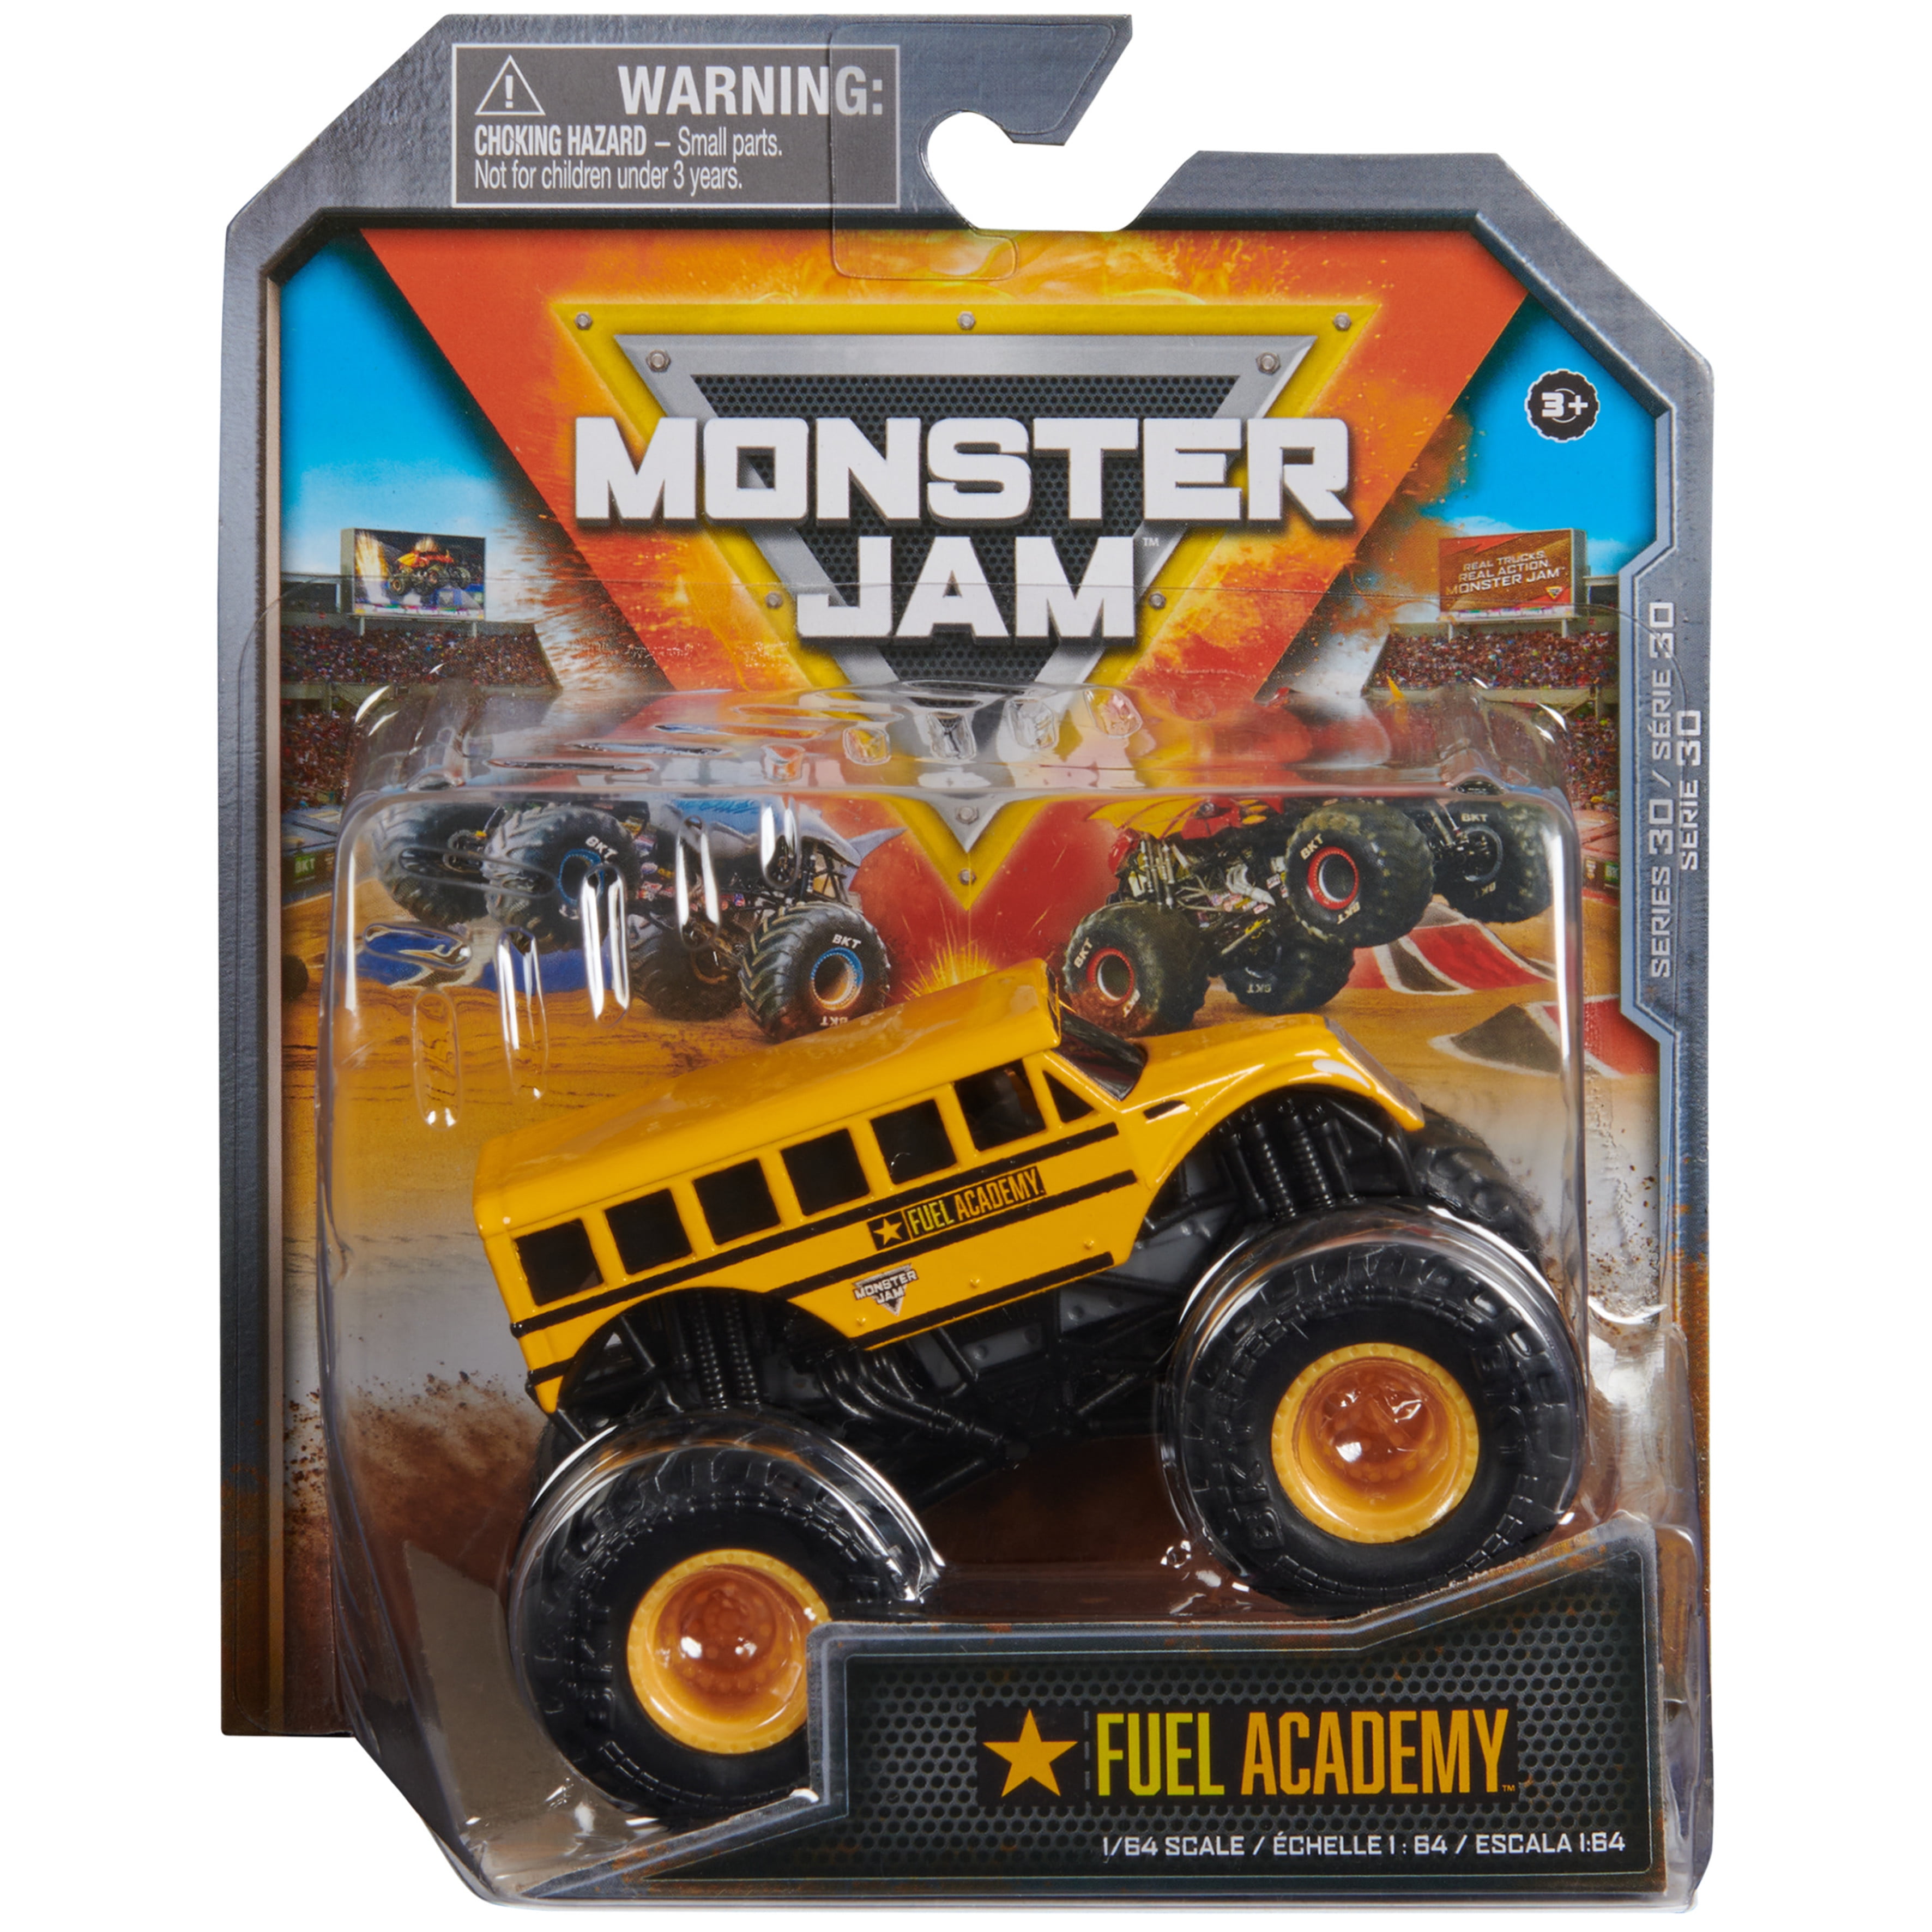 Monster Jam, Official Fuel Academy Monster Truck, Die-Cast Vehicle, 1:64  Scale, Kids Toys for Boys Ages 3 and up 